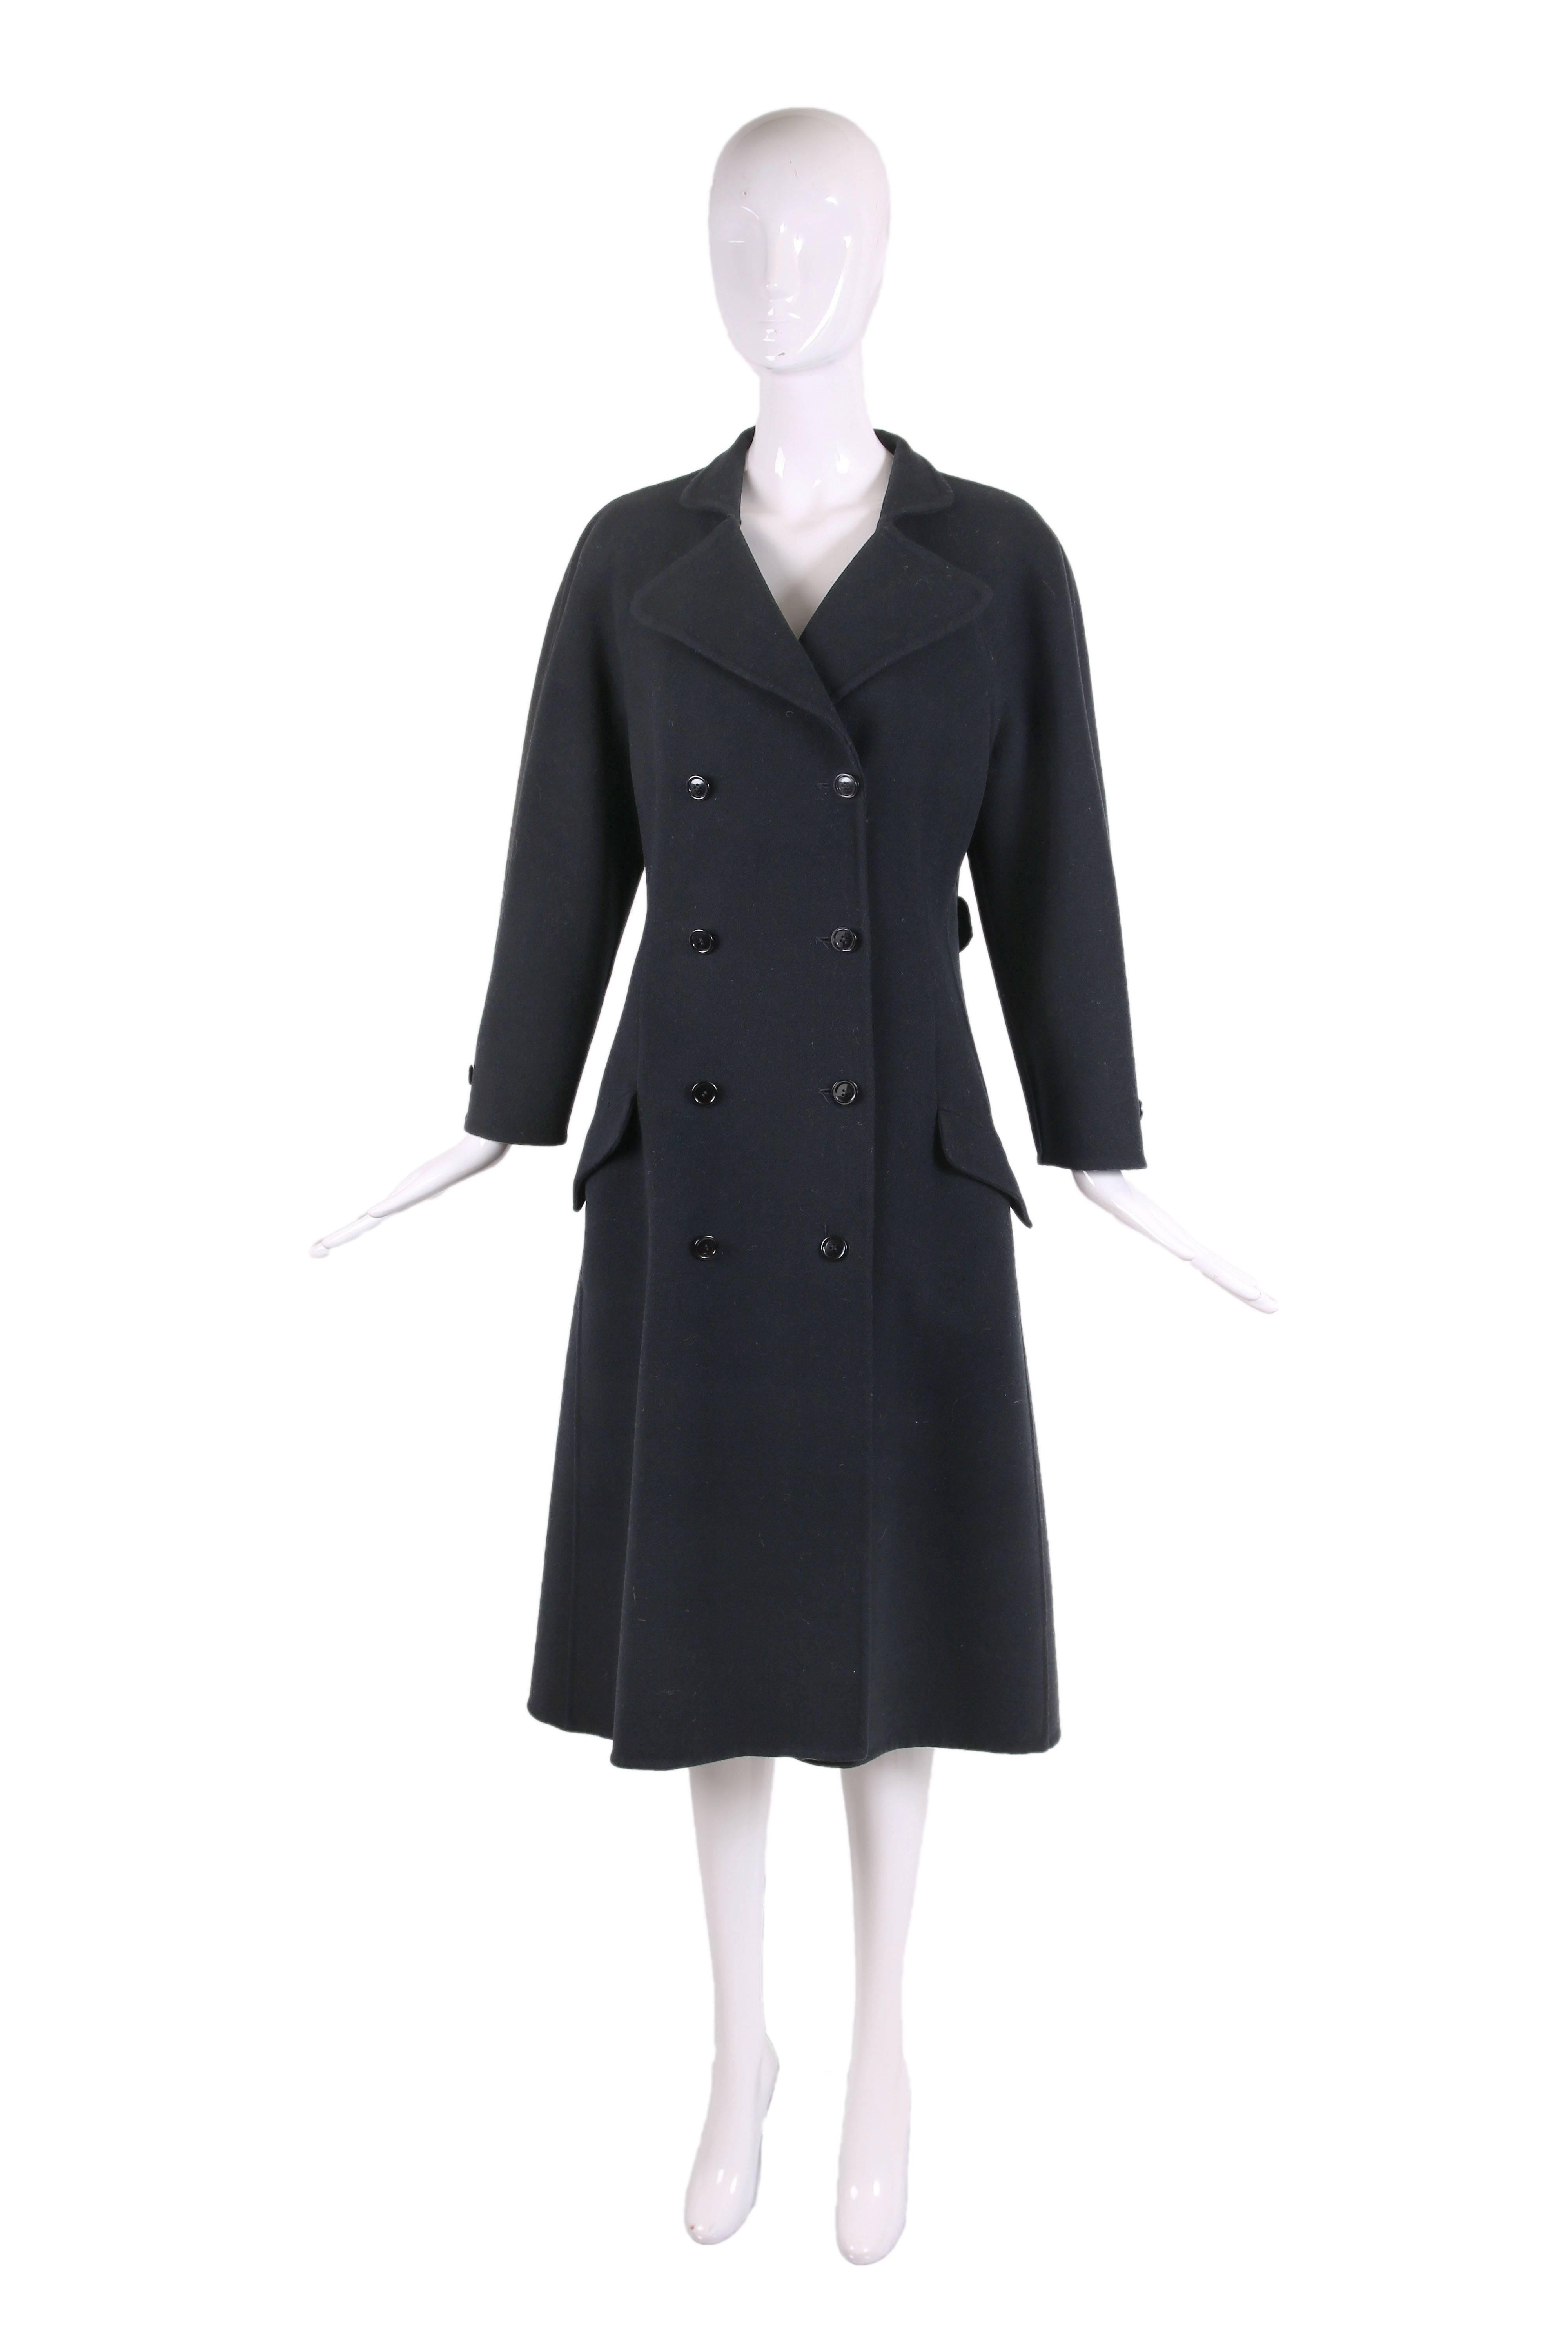 1970's Halston black wool double-breasted coat with raglan sleeves, two frontal flap pockets and bar tab at back. In excellent condition. No size or fabric tag - please consult measurements. 
MEASUREMENTS:
Bust - 40